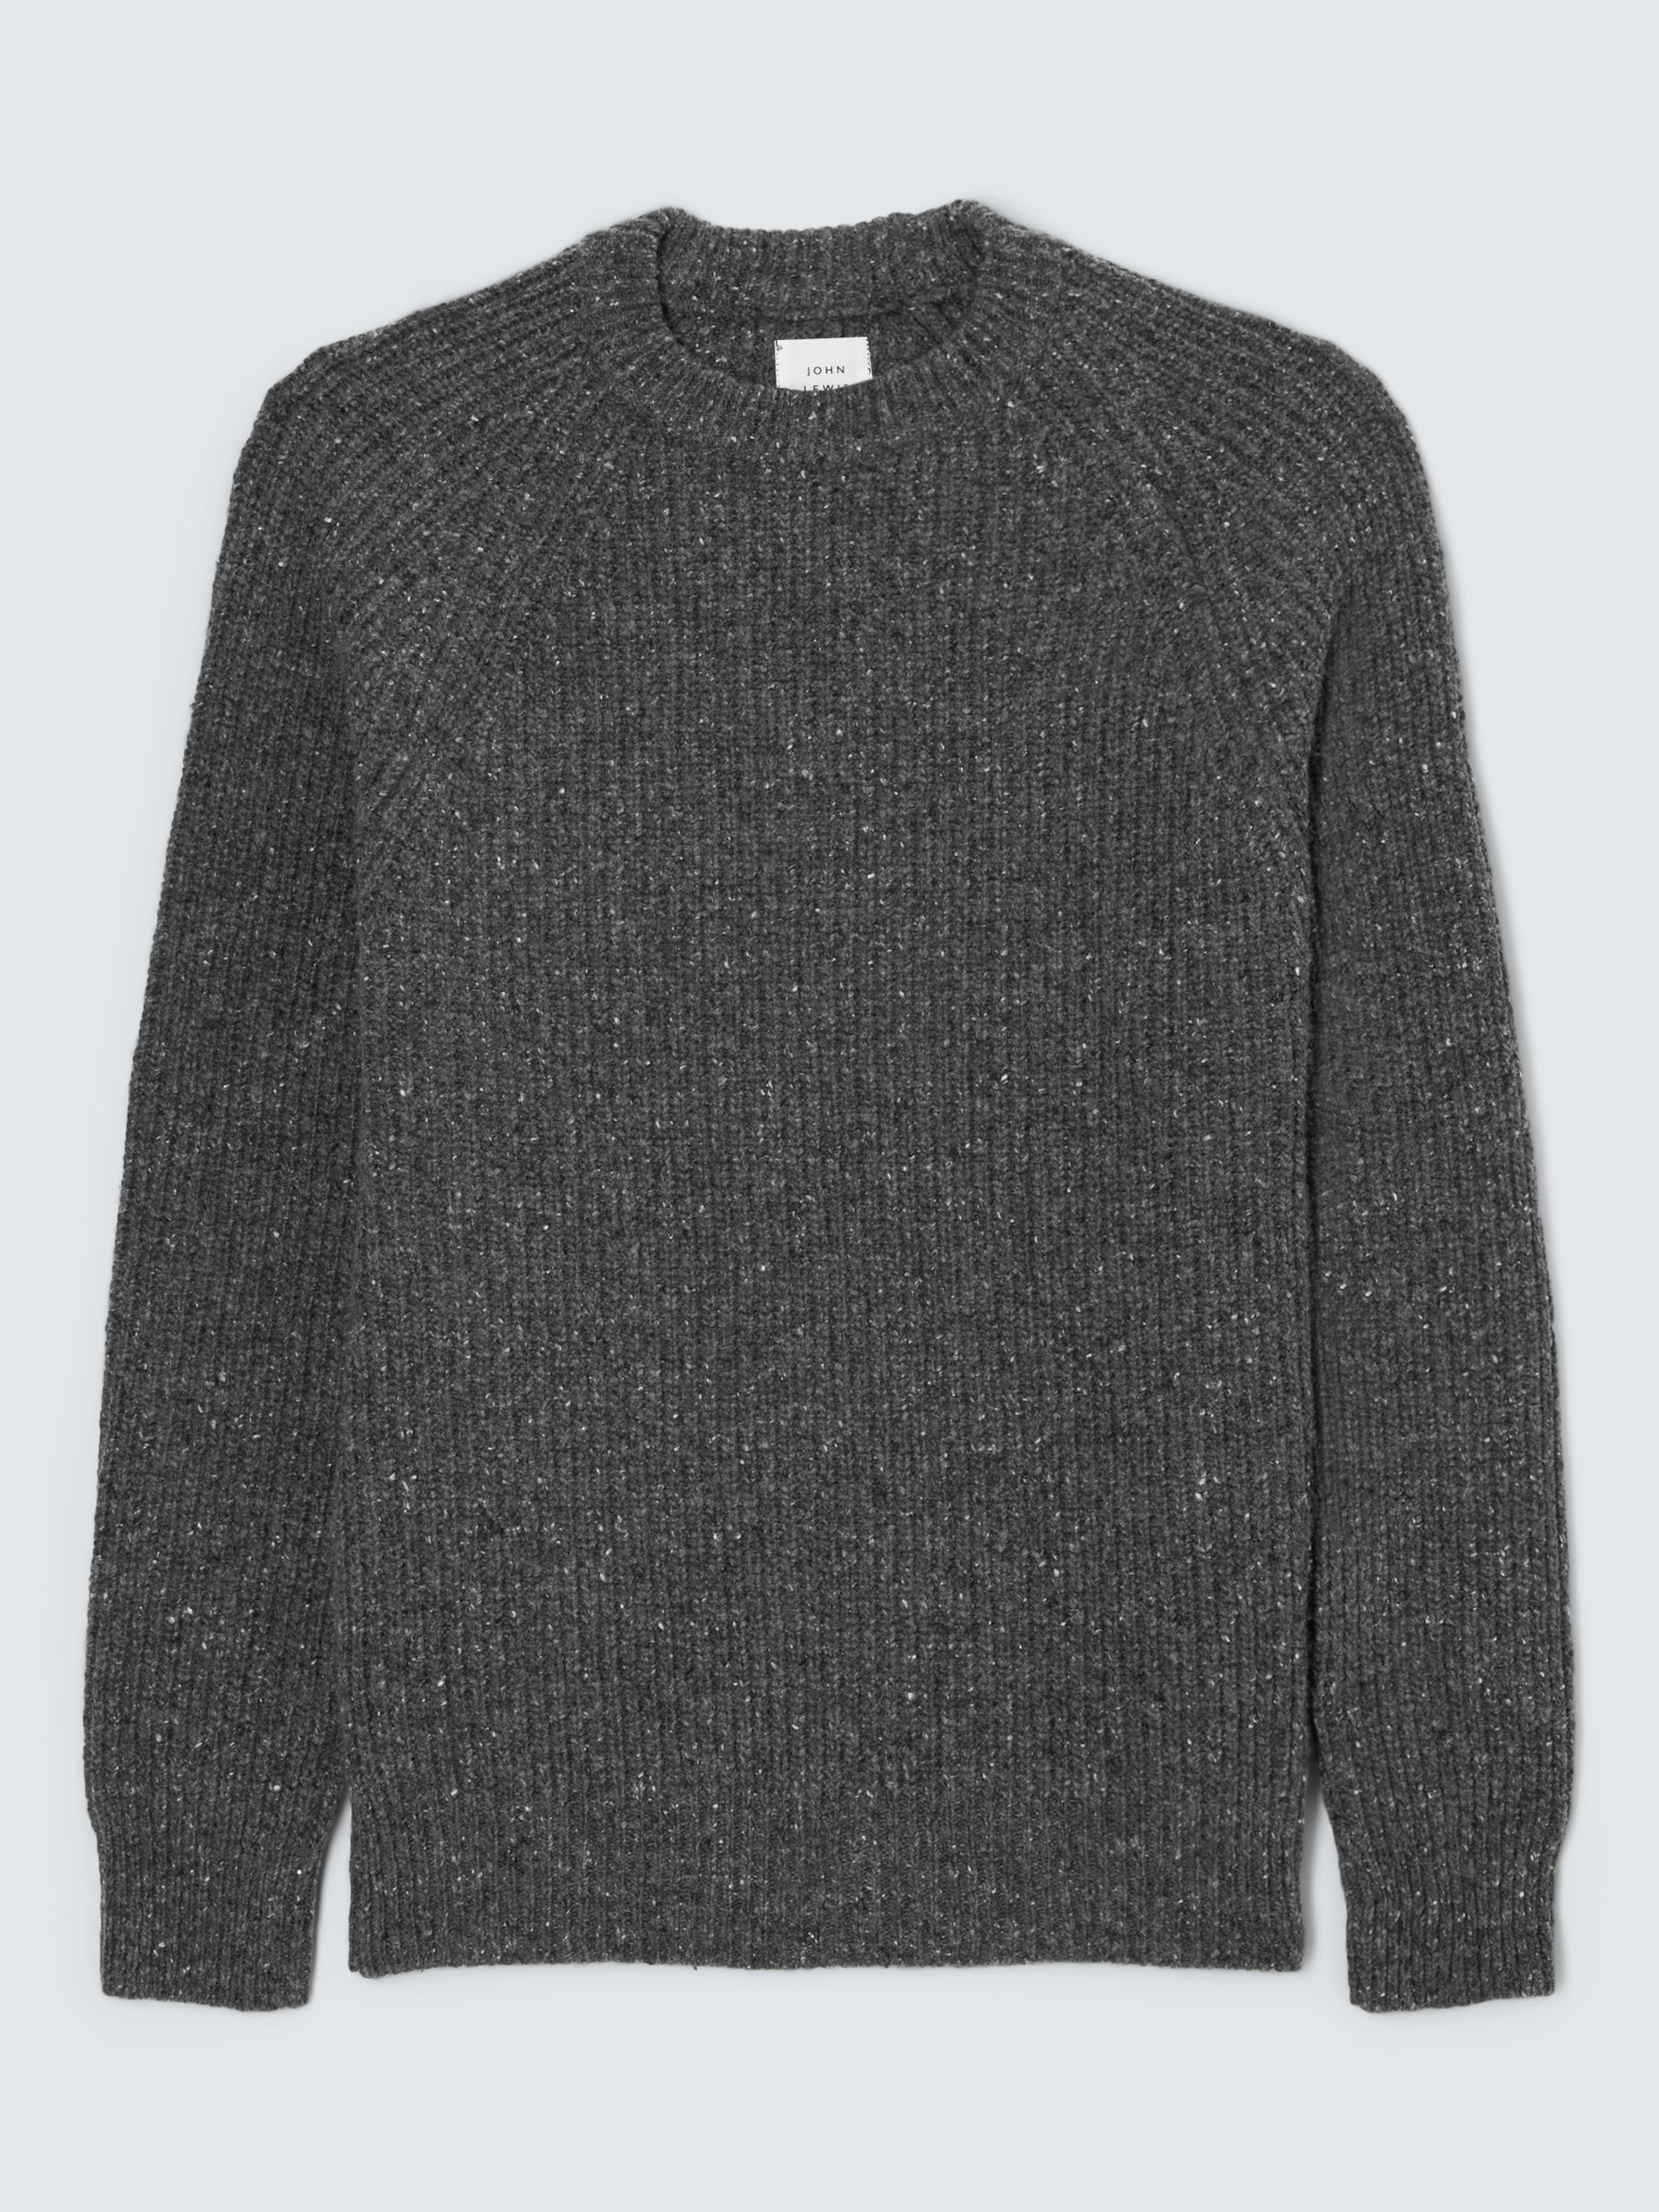 Buy John Lewis Made in Italy Wool Blend Donegal Look Rib Crew Neck Jumper Online at johnlewis.com